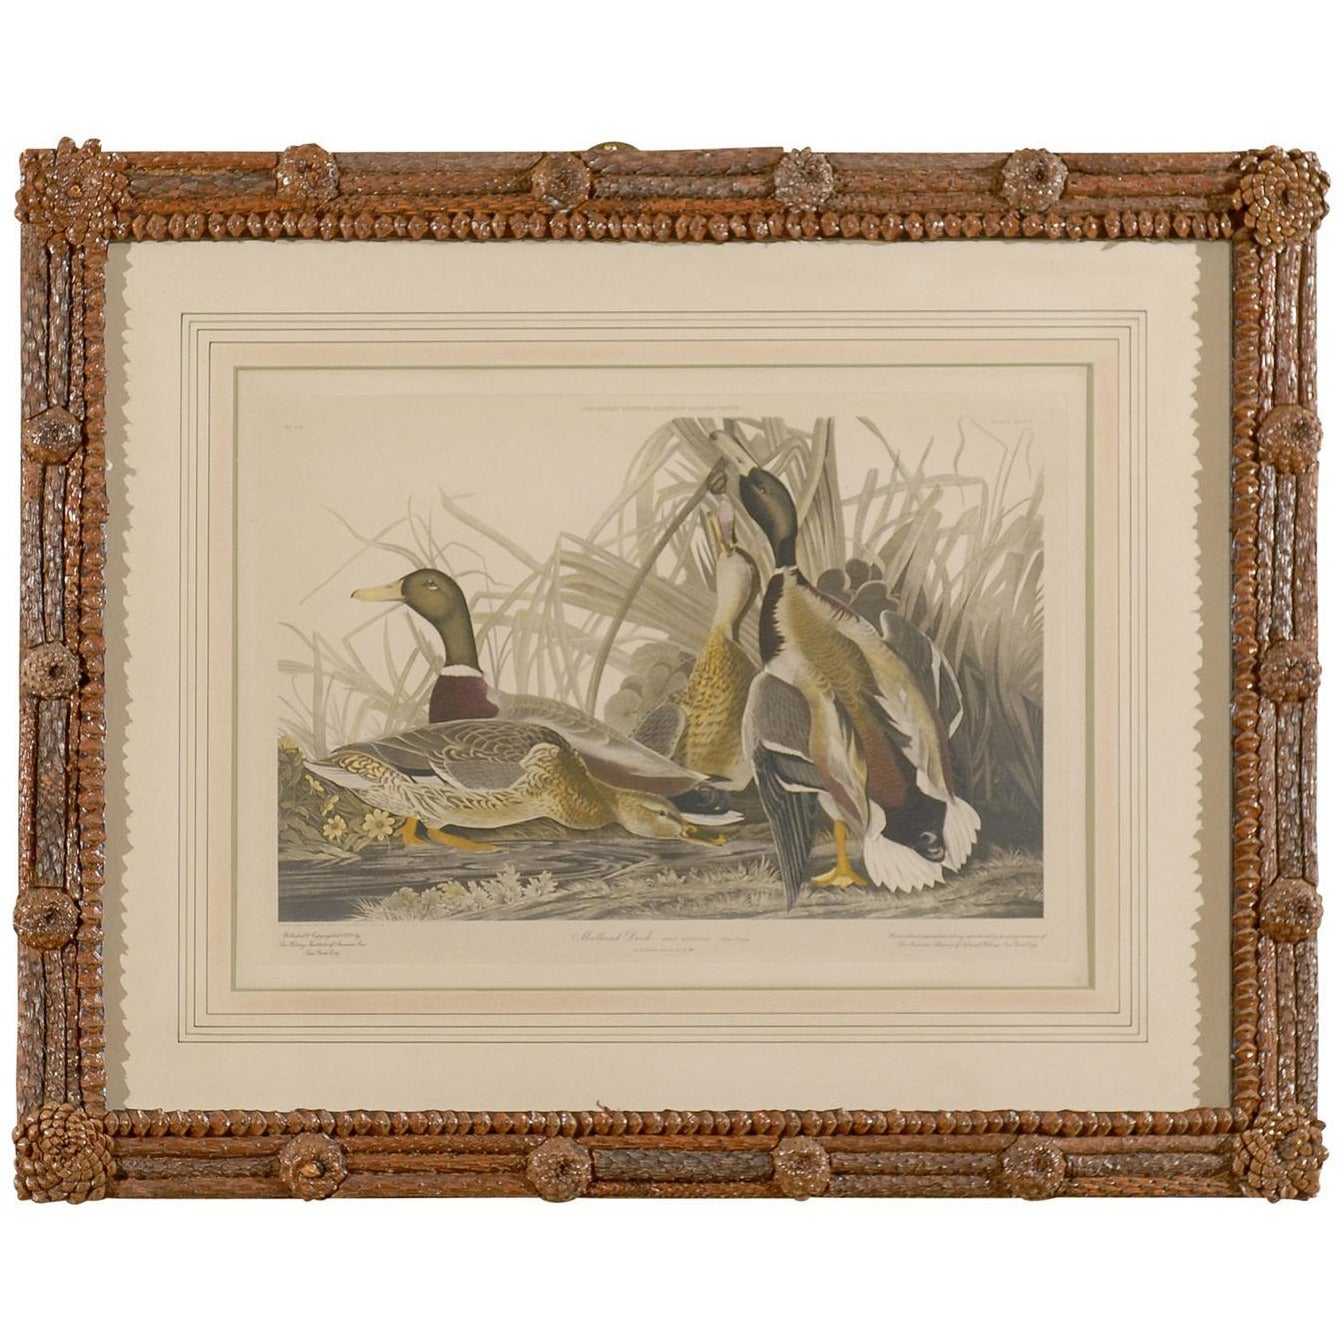 Audubon Print in Hand-Crafted Pine Cone and Bark Frame